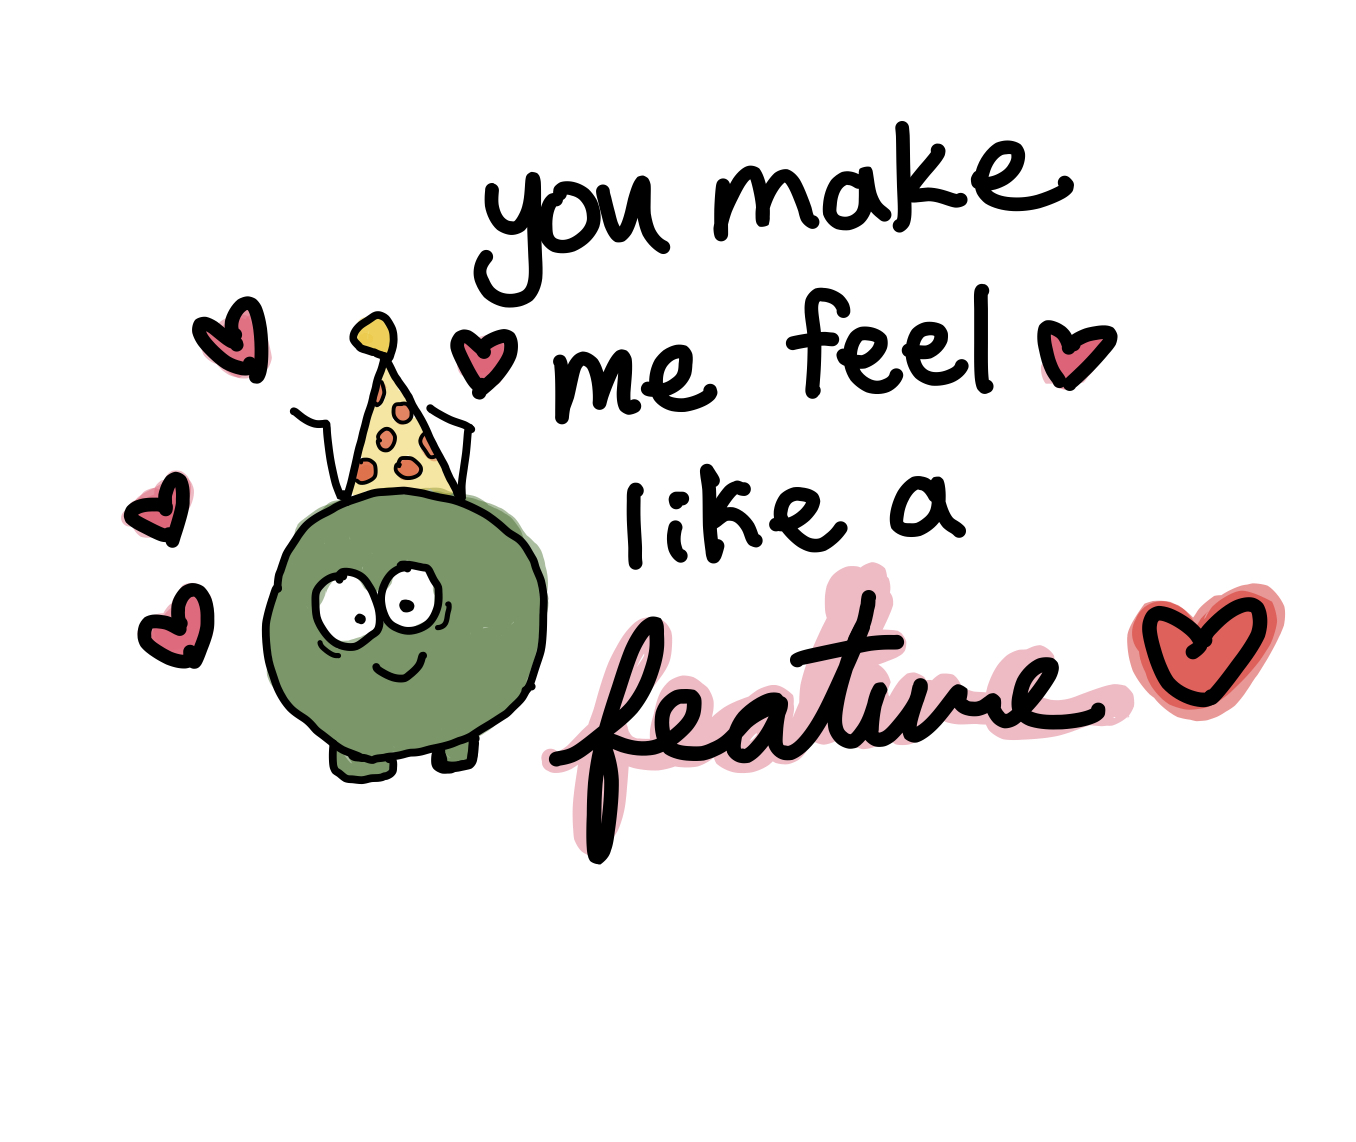 Image of a cute bug that says "you make me feel like a feature"